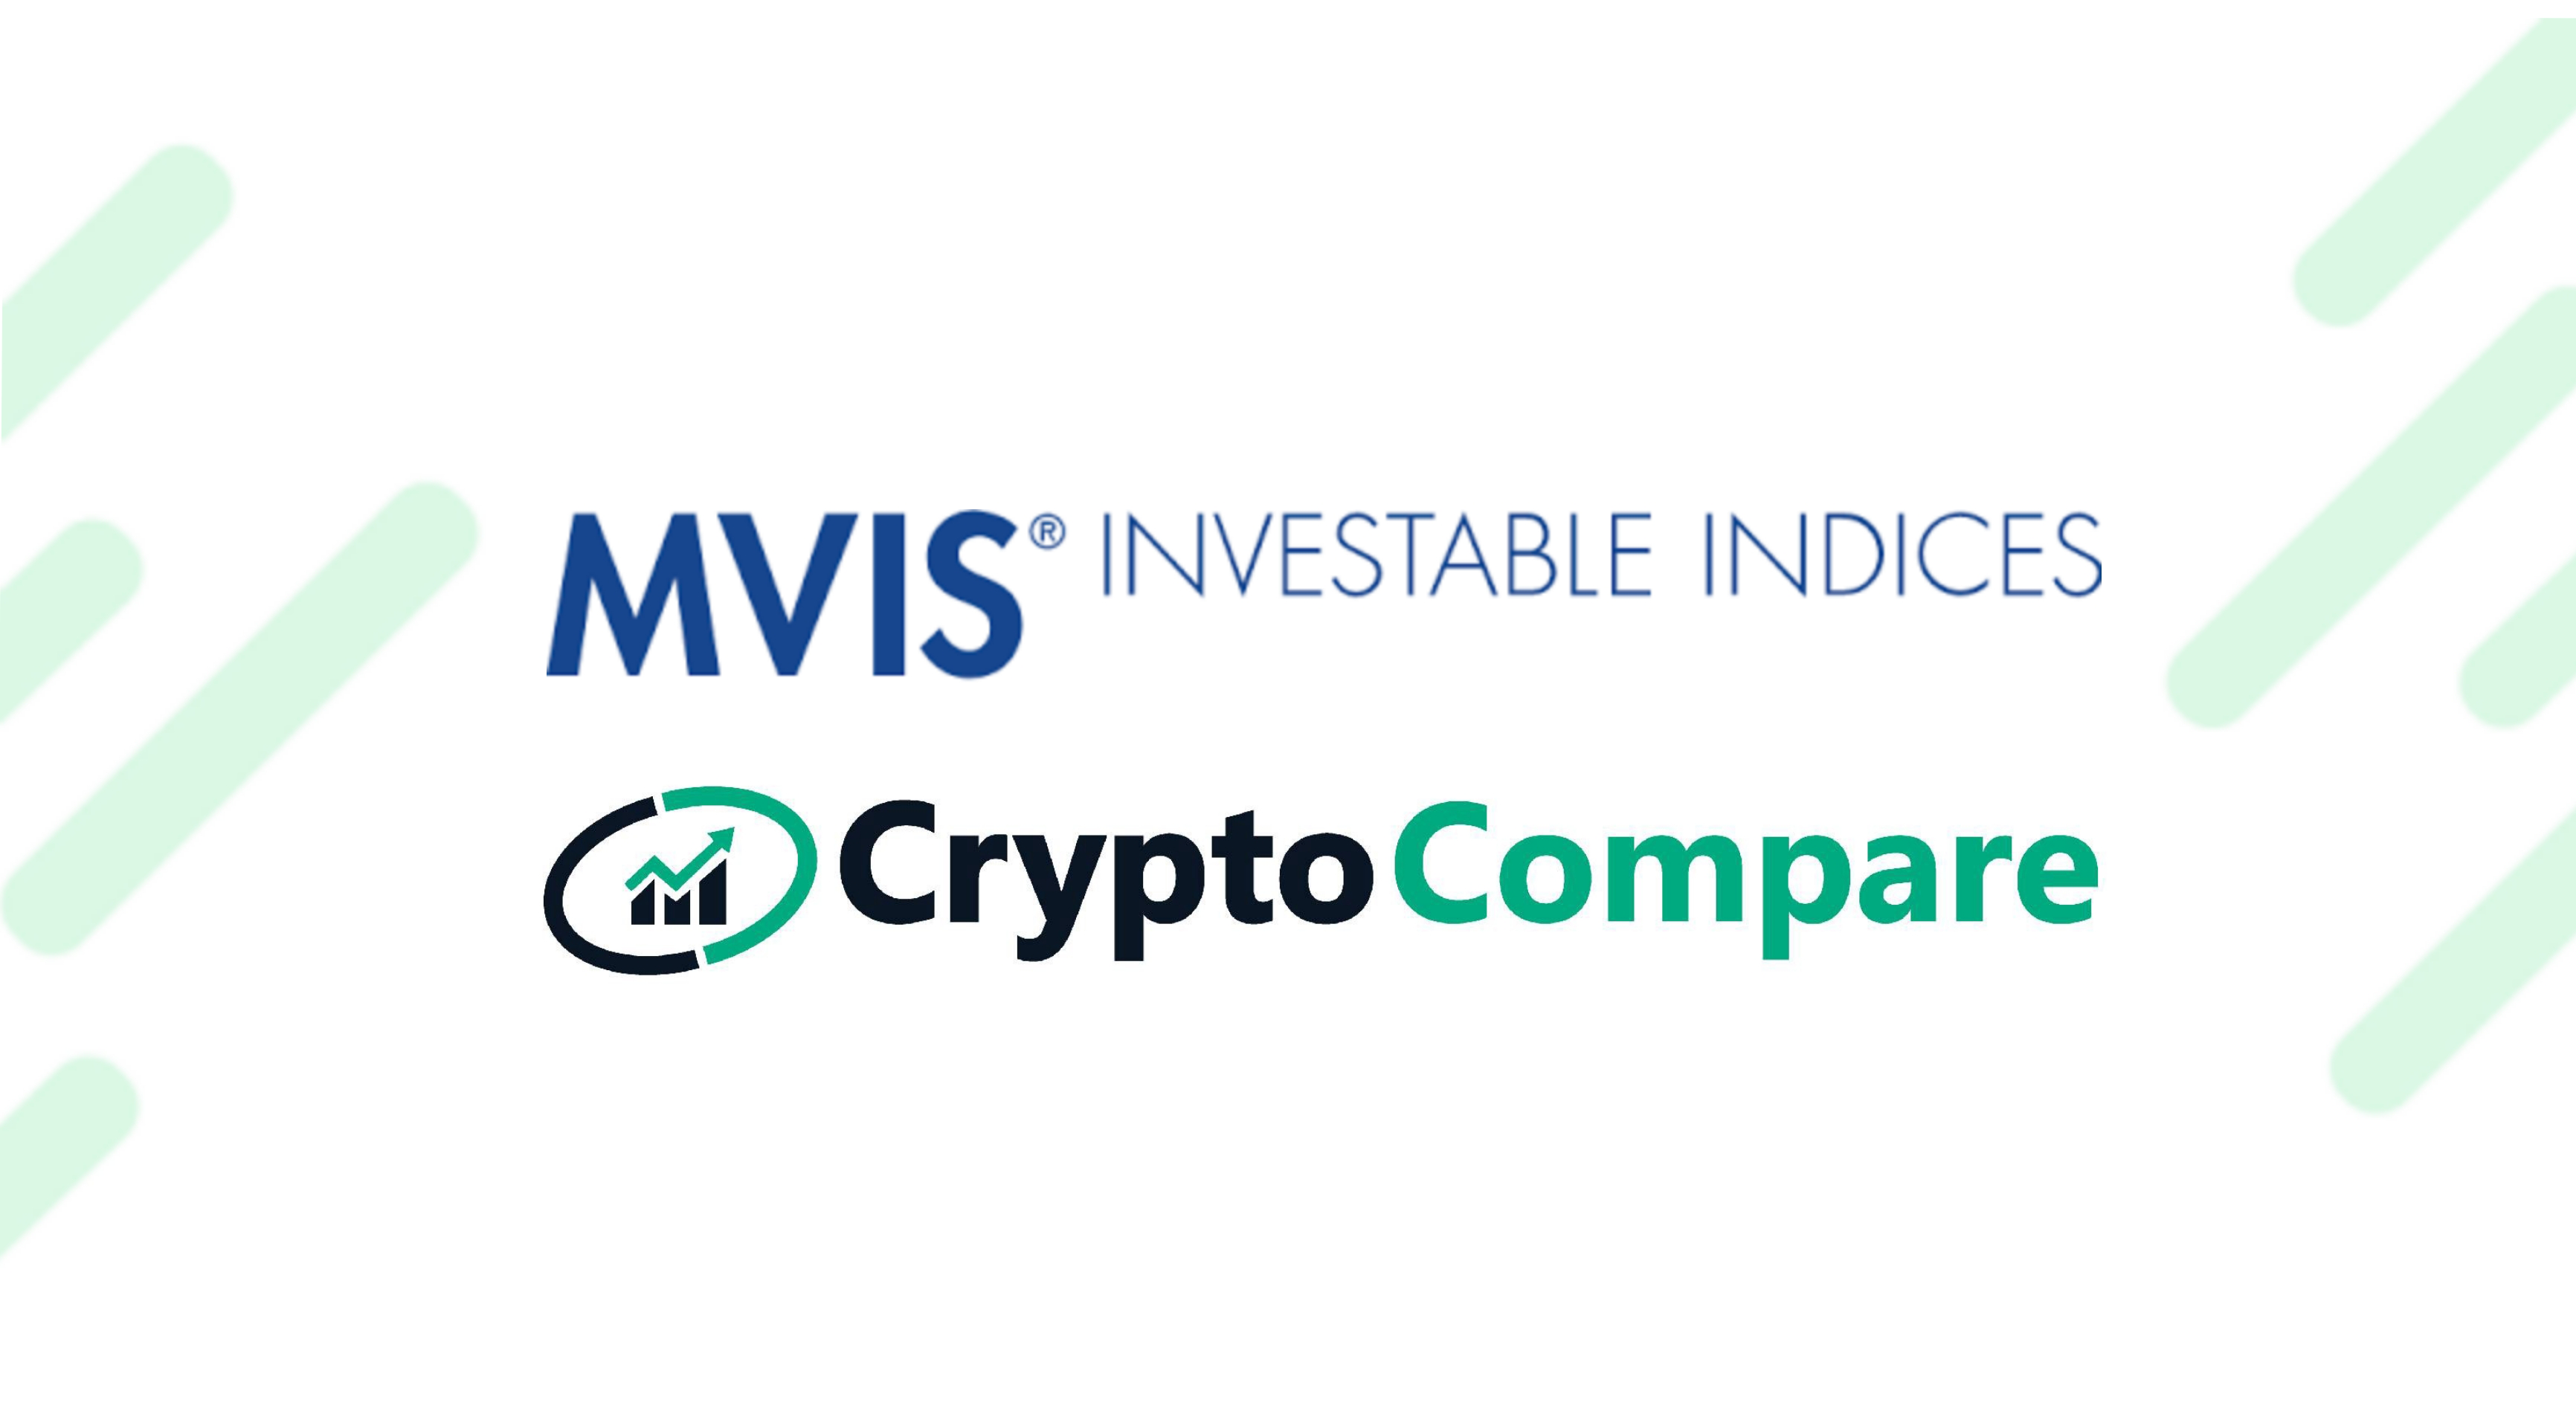 MVIS and CryptoCompare Launch the MVIS CryptoCompare Global Bitcoin Benchmark Rate (AUD) and the MVIS CryptoCompare Global Ethereum Benchmark Rate (AUD)